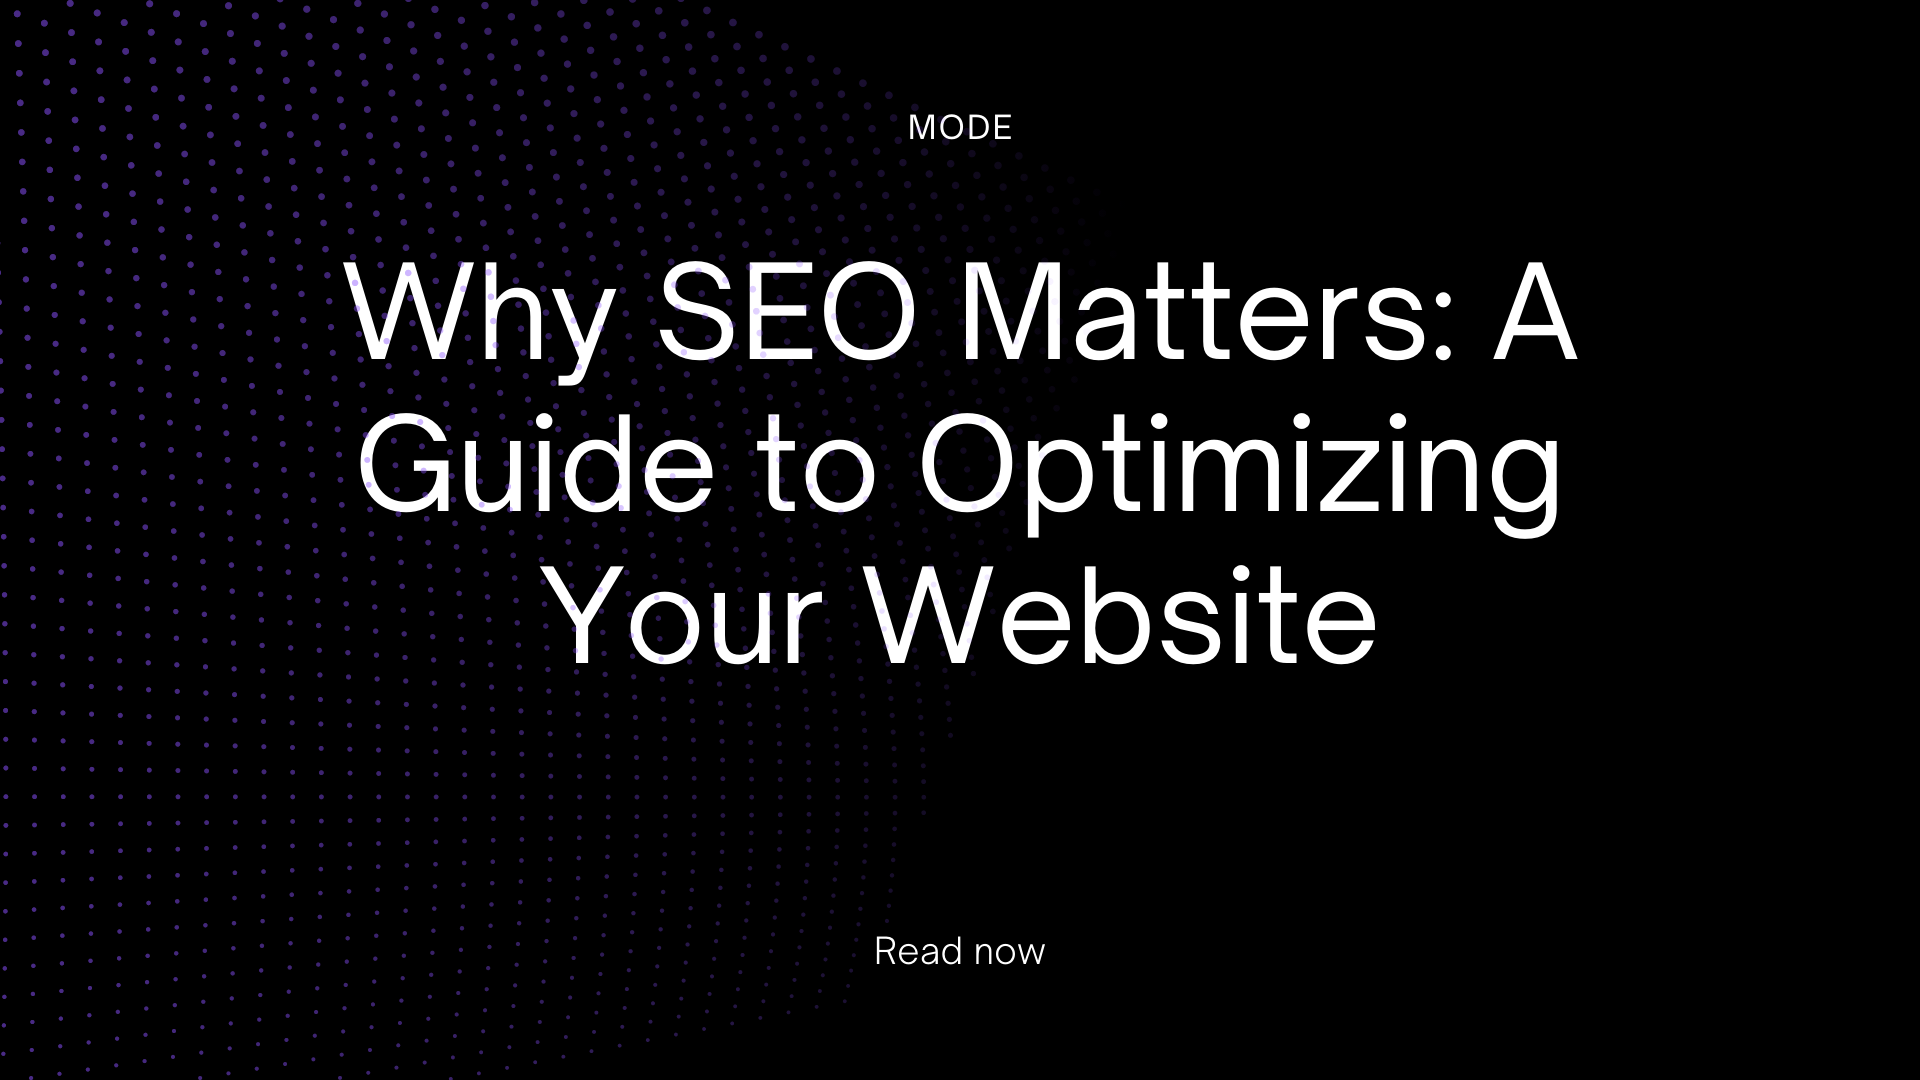 Why SEO Matters: A Guide to Optimizing Your Website